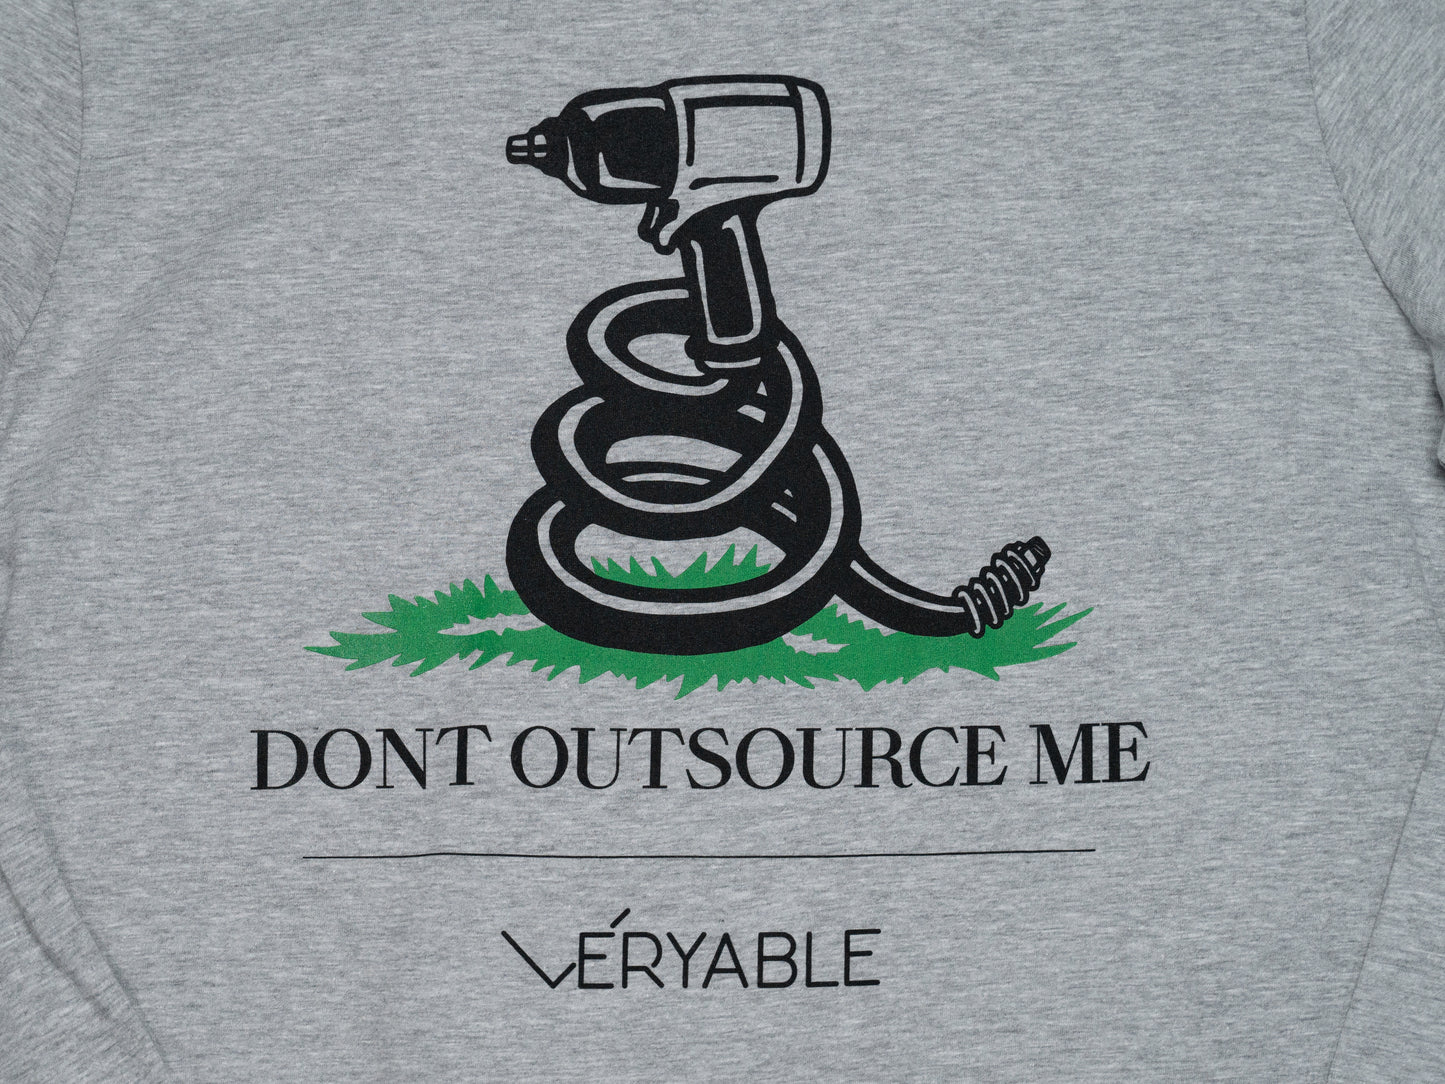 Veryable "Don't Outsource Me" Long Sleeve T-Shirt